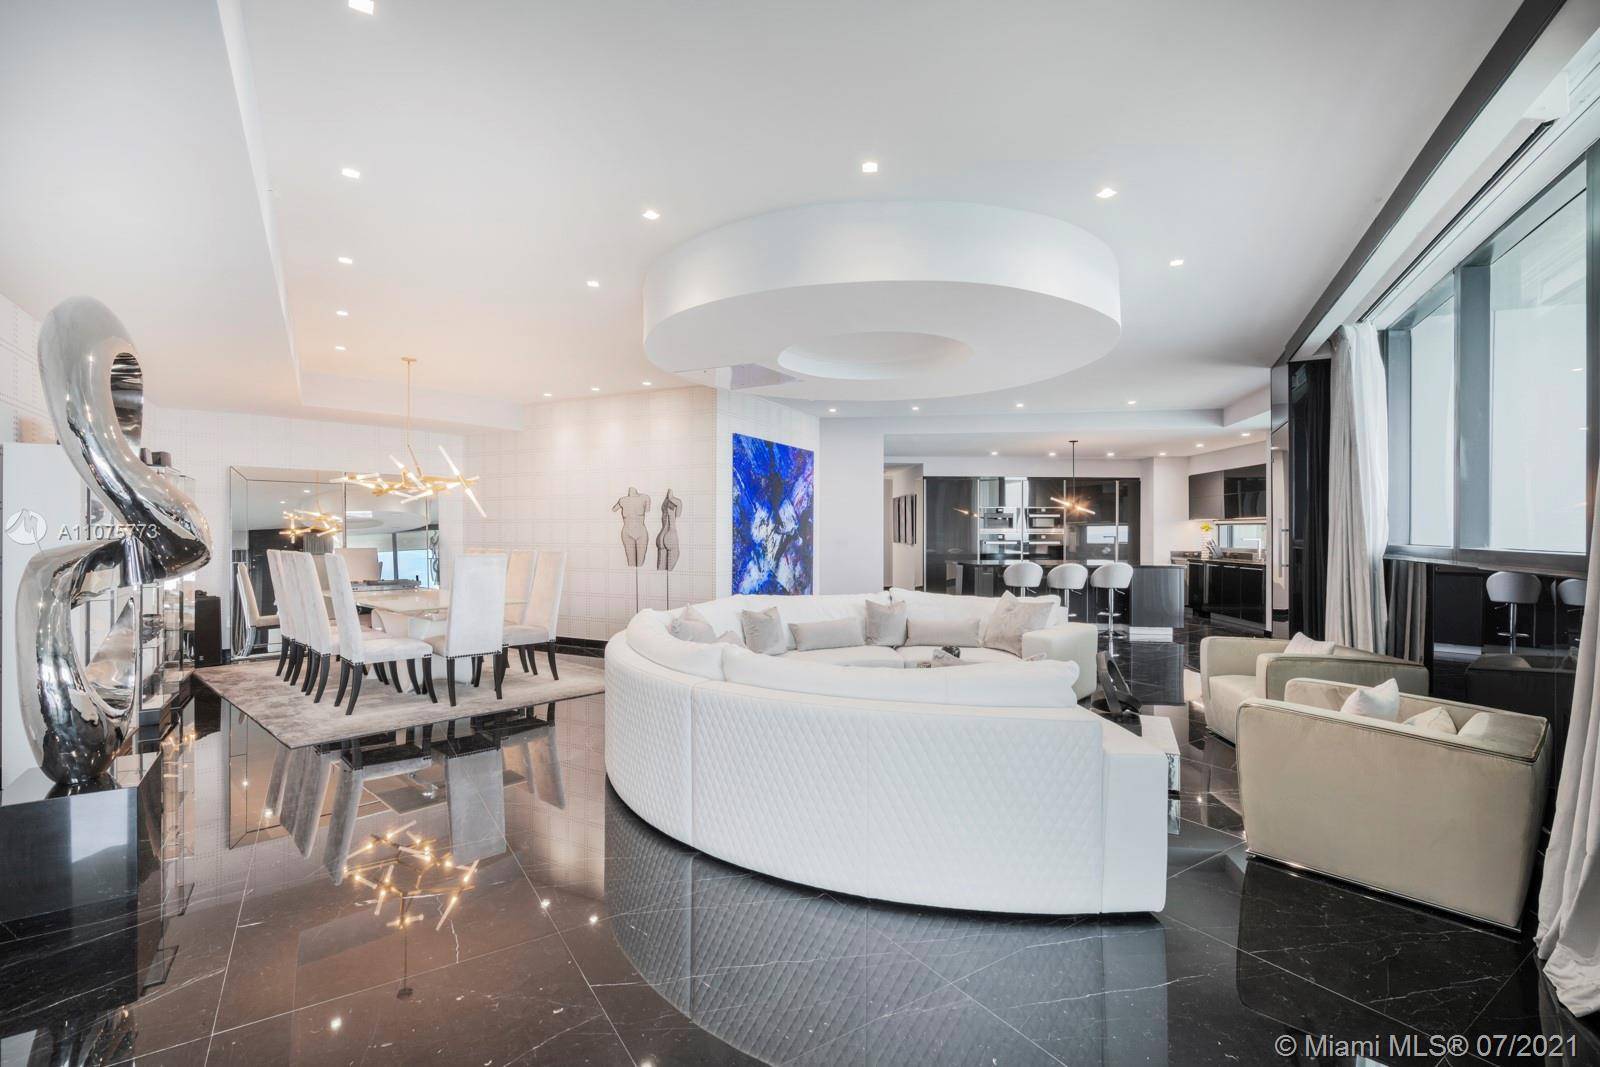 Extravagant 4 bedroom sky home at the most exclusive tower in Sunny Isles Miami.